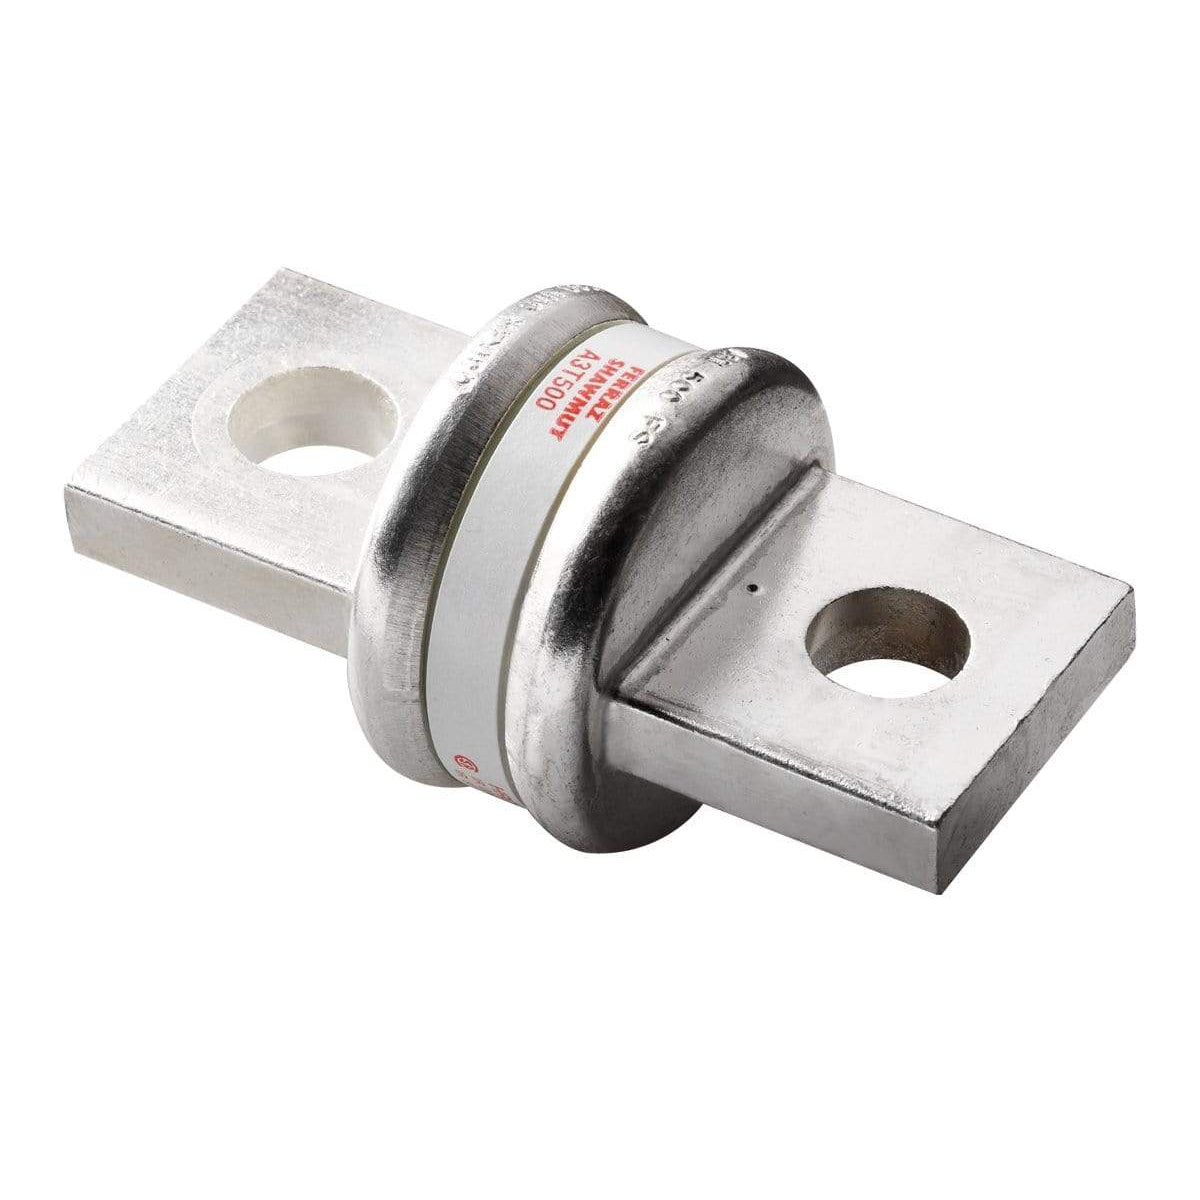 BEP Marine Qualifies for Free Shipping BEP 350a Class T Fuse #FT-350-B